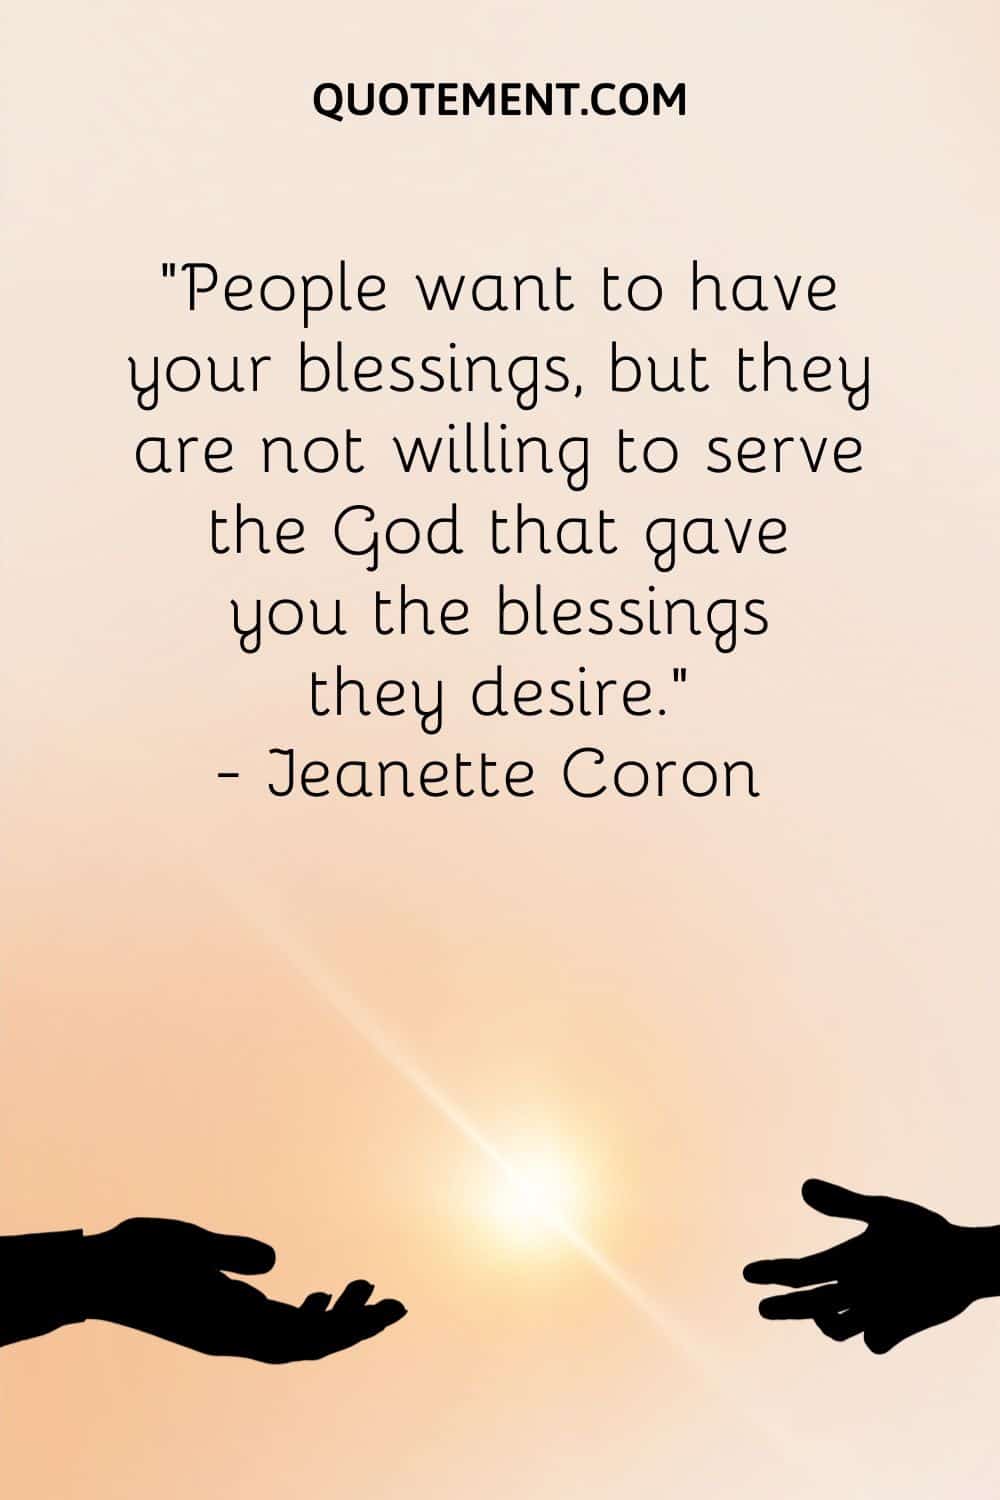 “People want to have your blessings, but they are not willing to serve the God that gave you the blessings they desire.” ― Jeanette Coron